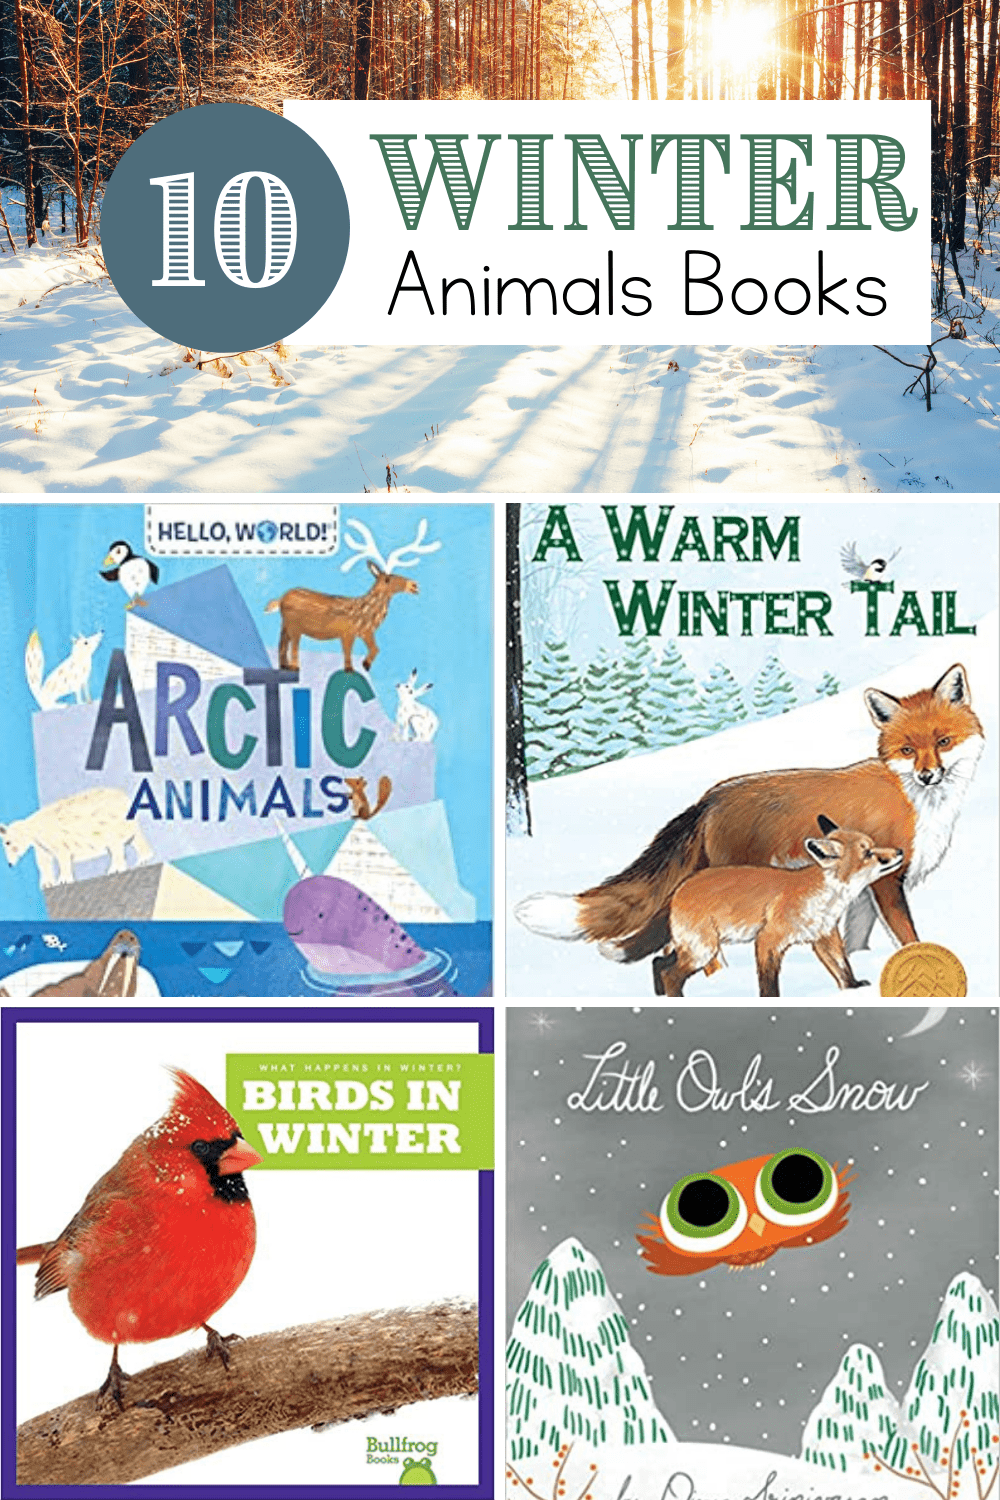 10 Engaging Winter Animals Books for Preschoolers